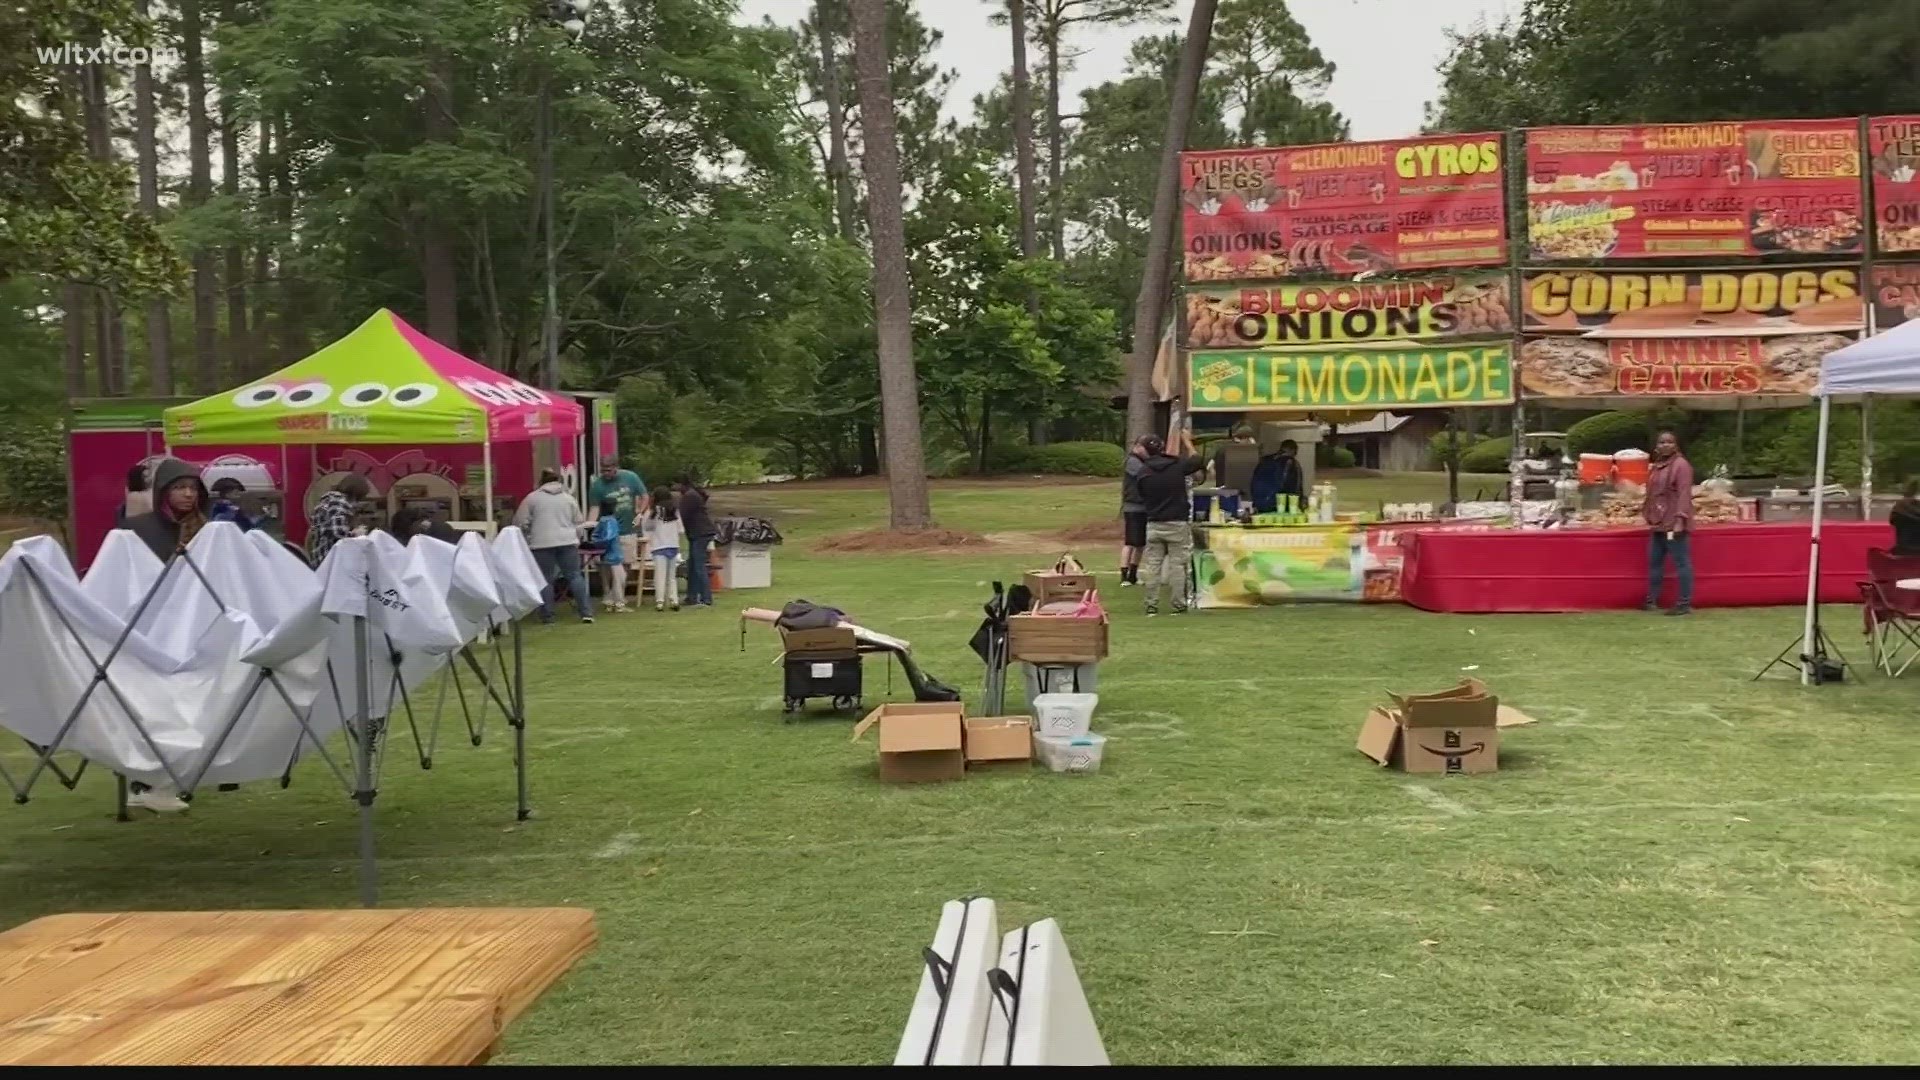 The Sumter Iris Festival took place as scheduled Friday, but won't happen Saturday due to the forecast for rain.